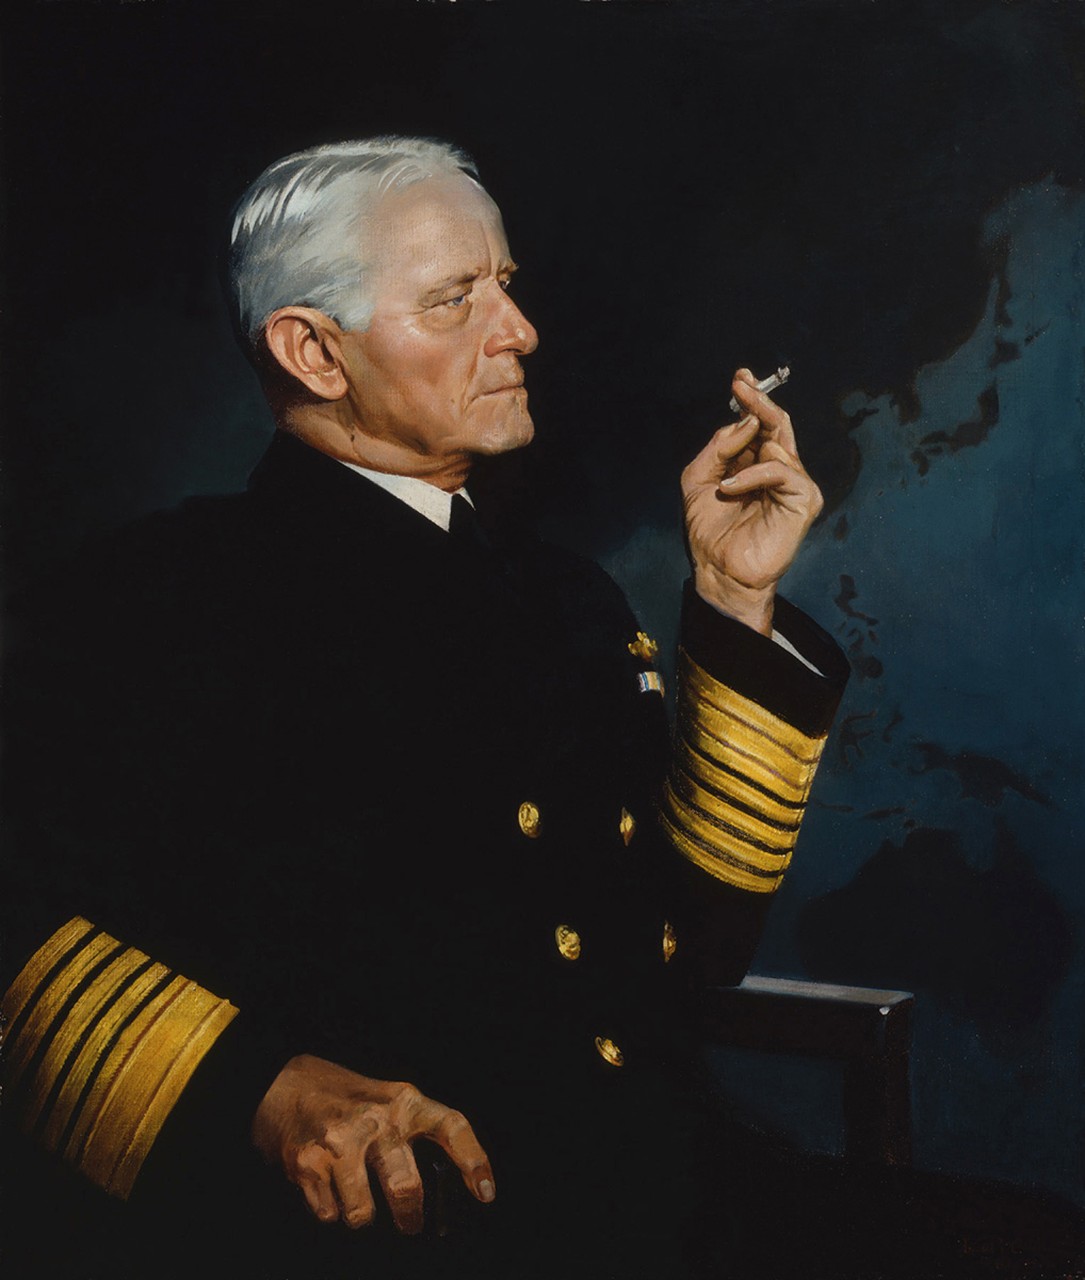 Admiral Chester W. Nimitz is seated smoking a cigarette and wearing his dress blues